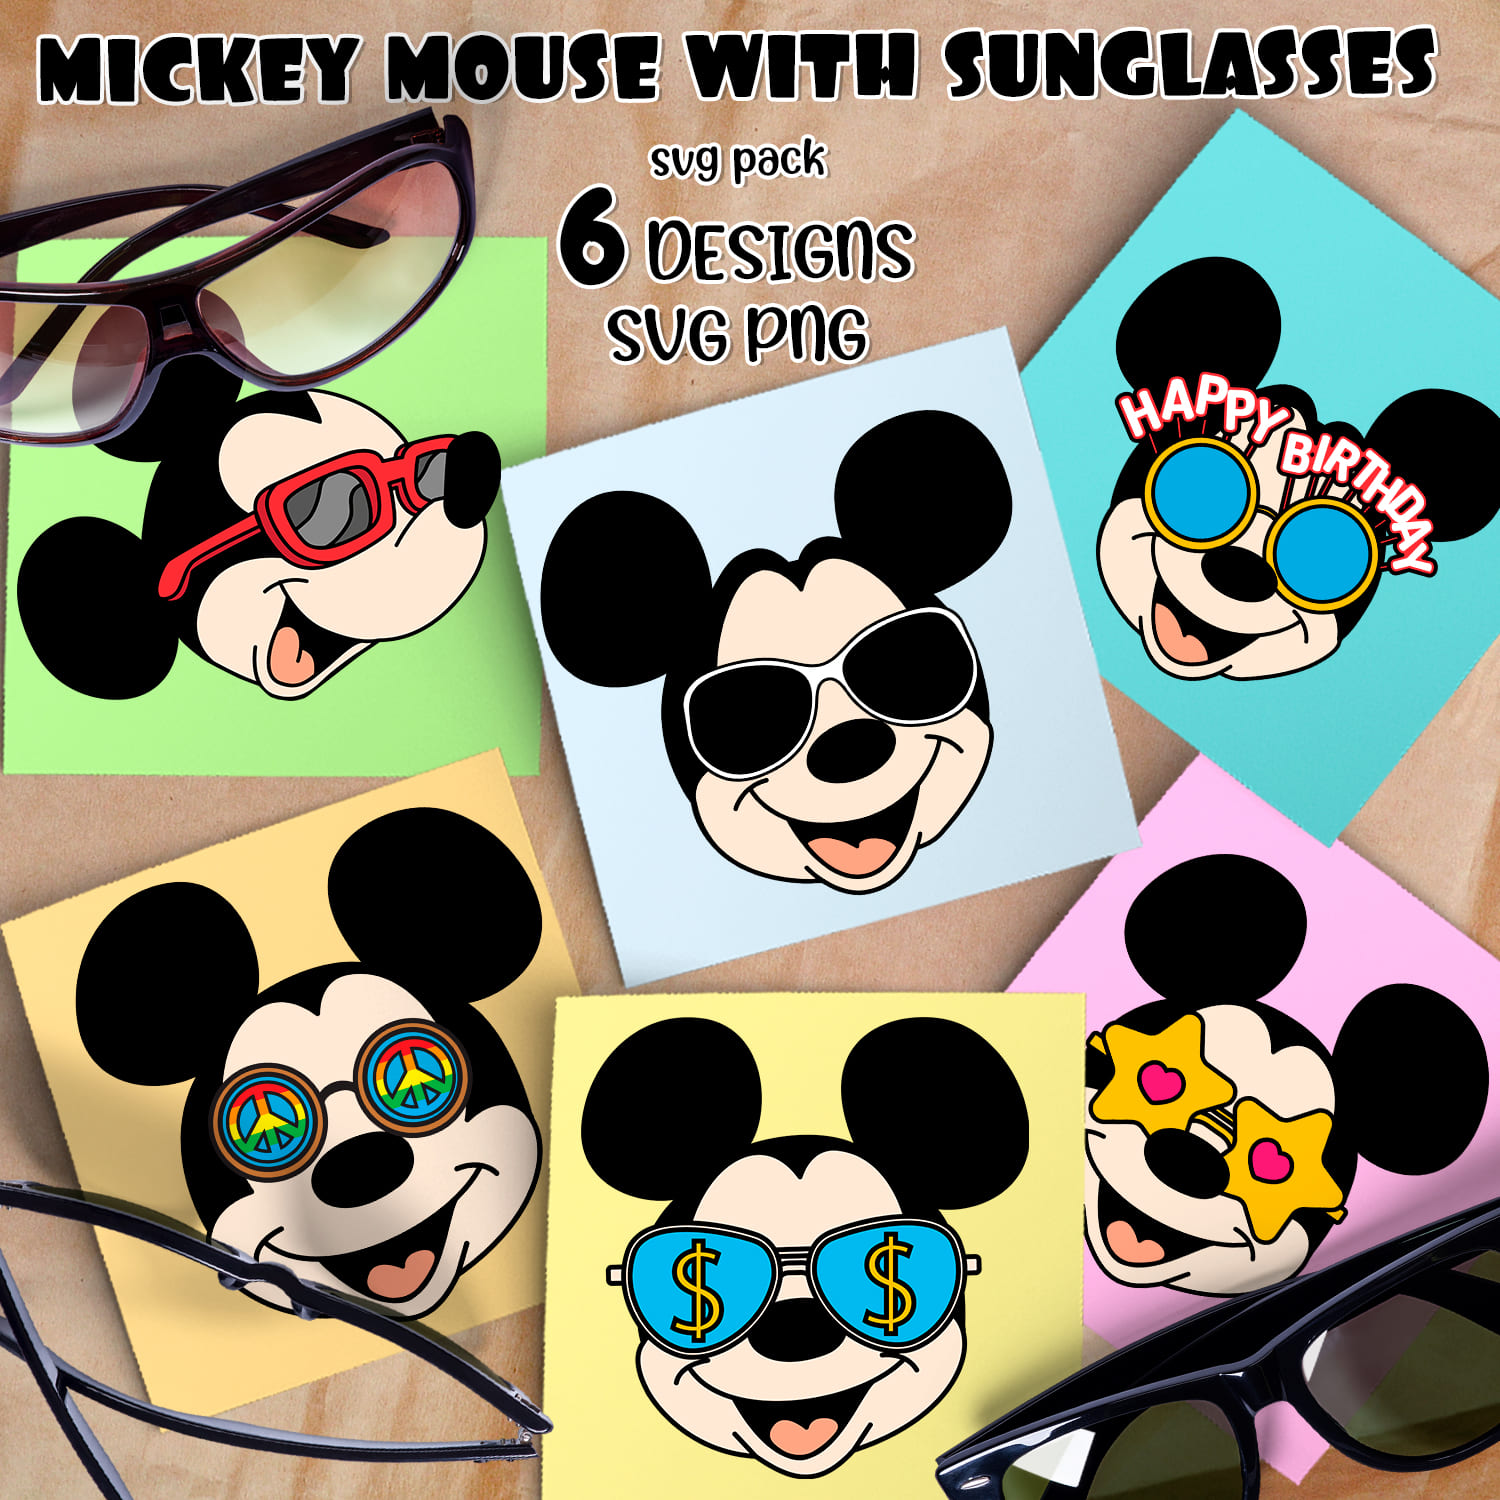 Mickey Mouse with Sunglasses SVG.